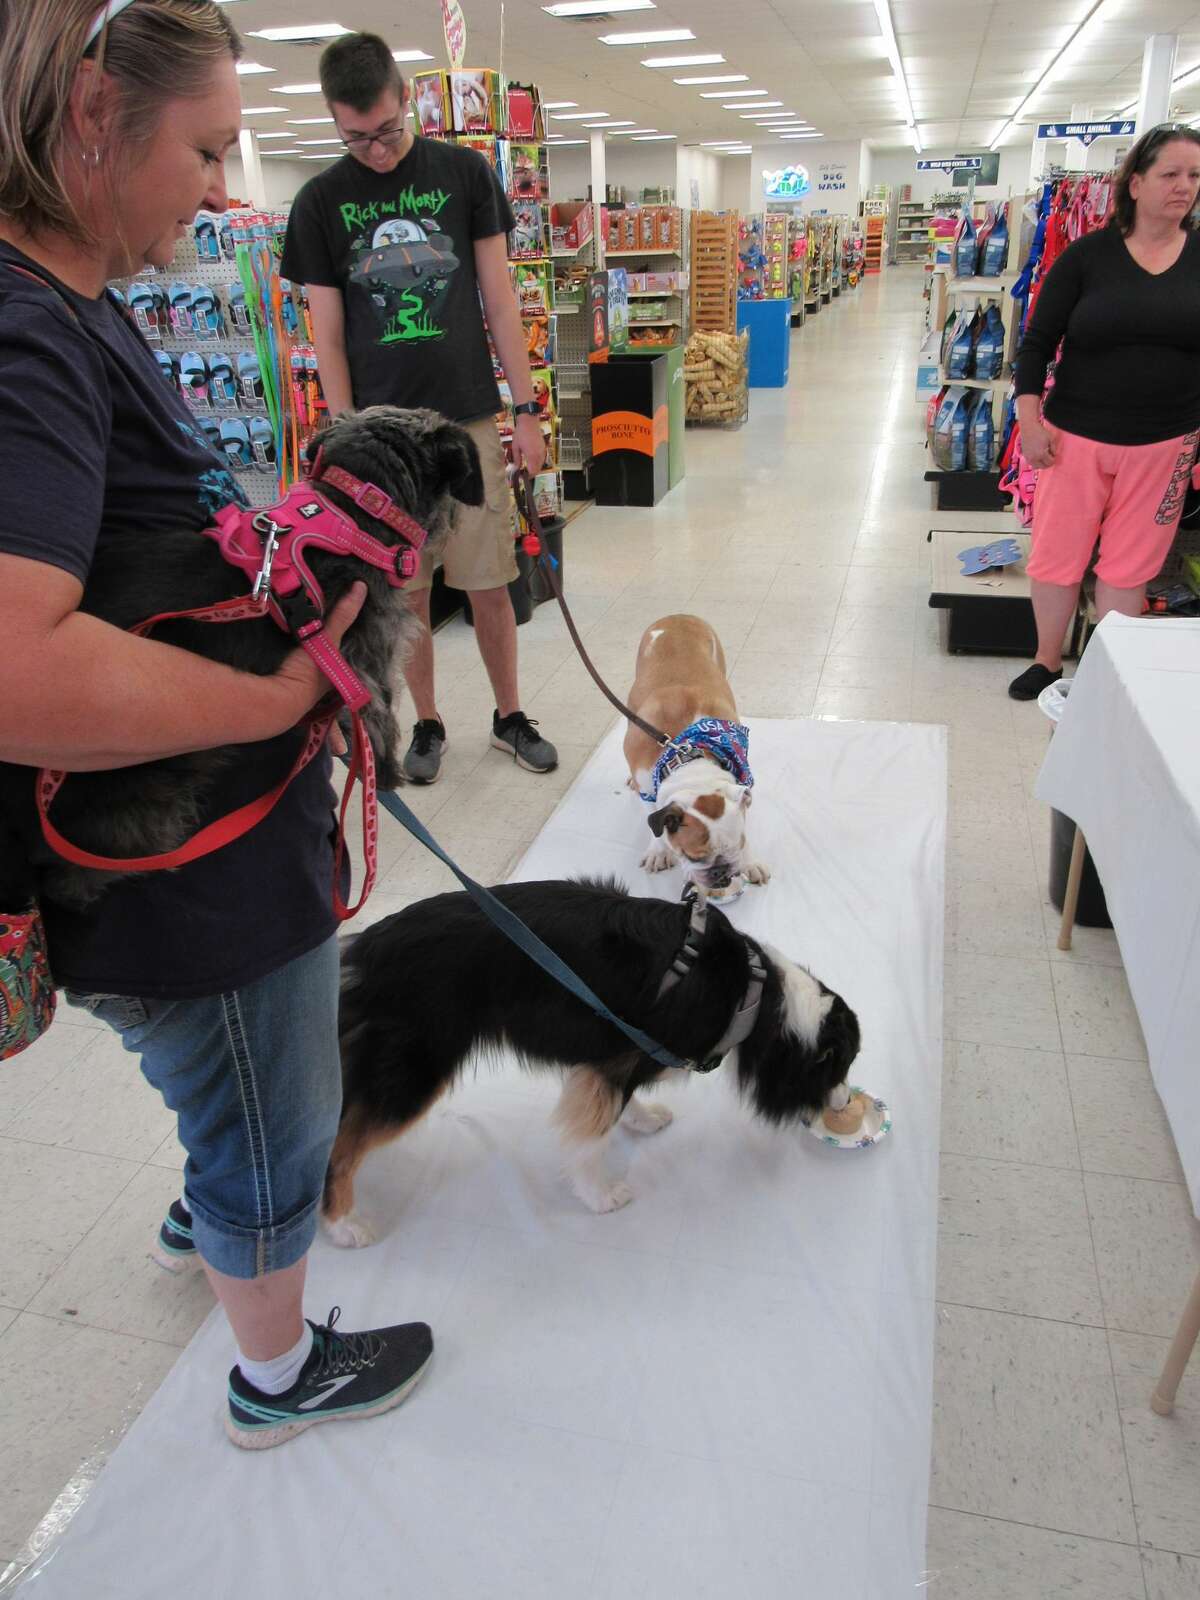 Dogs of all ages and breeds participated in the fourth annual Dog Fro-Yo Eating Contest on Saturday, Aug. 17 at Soldan's Pet Supplies in Midland.